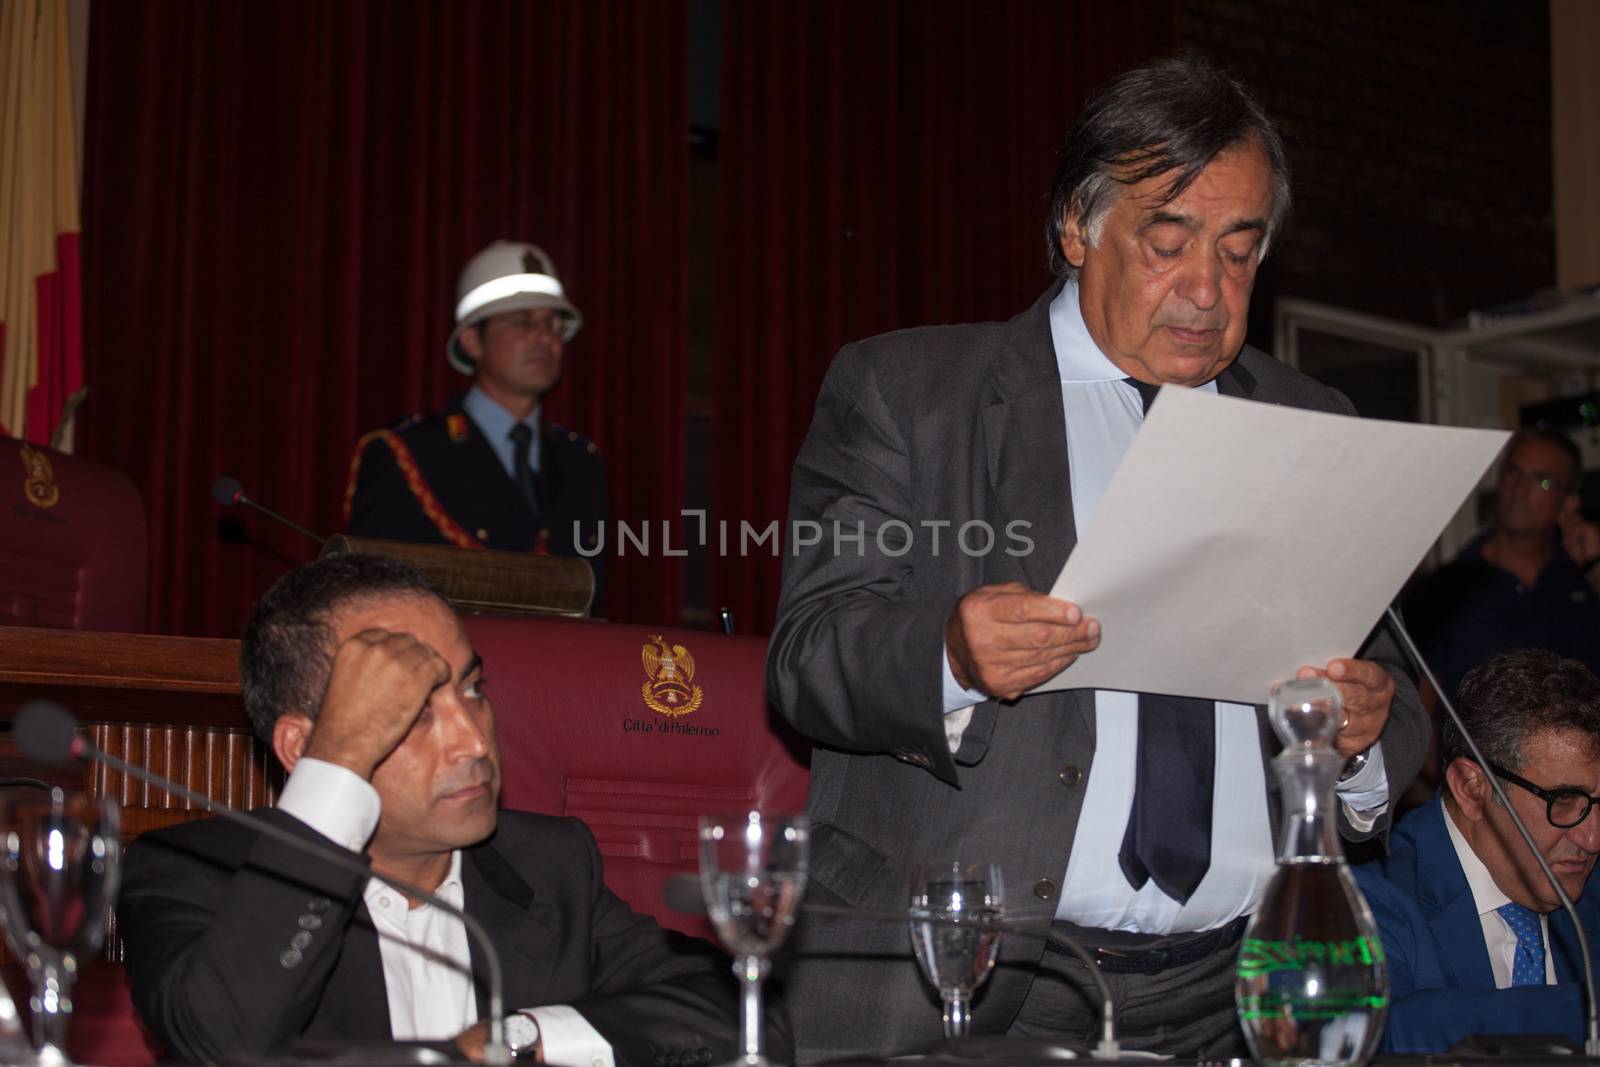 ITALY, Palermo: Palermo Mayor Leoluca Orlando addresses a ceremony granting honorary citizenship to international organization Doctors Without Borders on September 16, 2015. Among those attending the ceremony were Ahmad Al Rousan, cultural mediator with Doctors Without Borders, and Leoluca Orlando, Italian politician and Palermo Mayor.